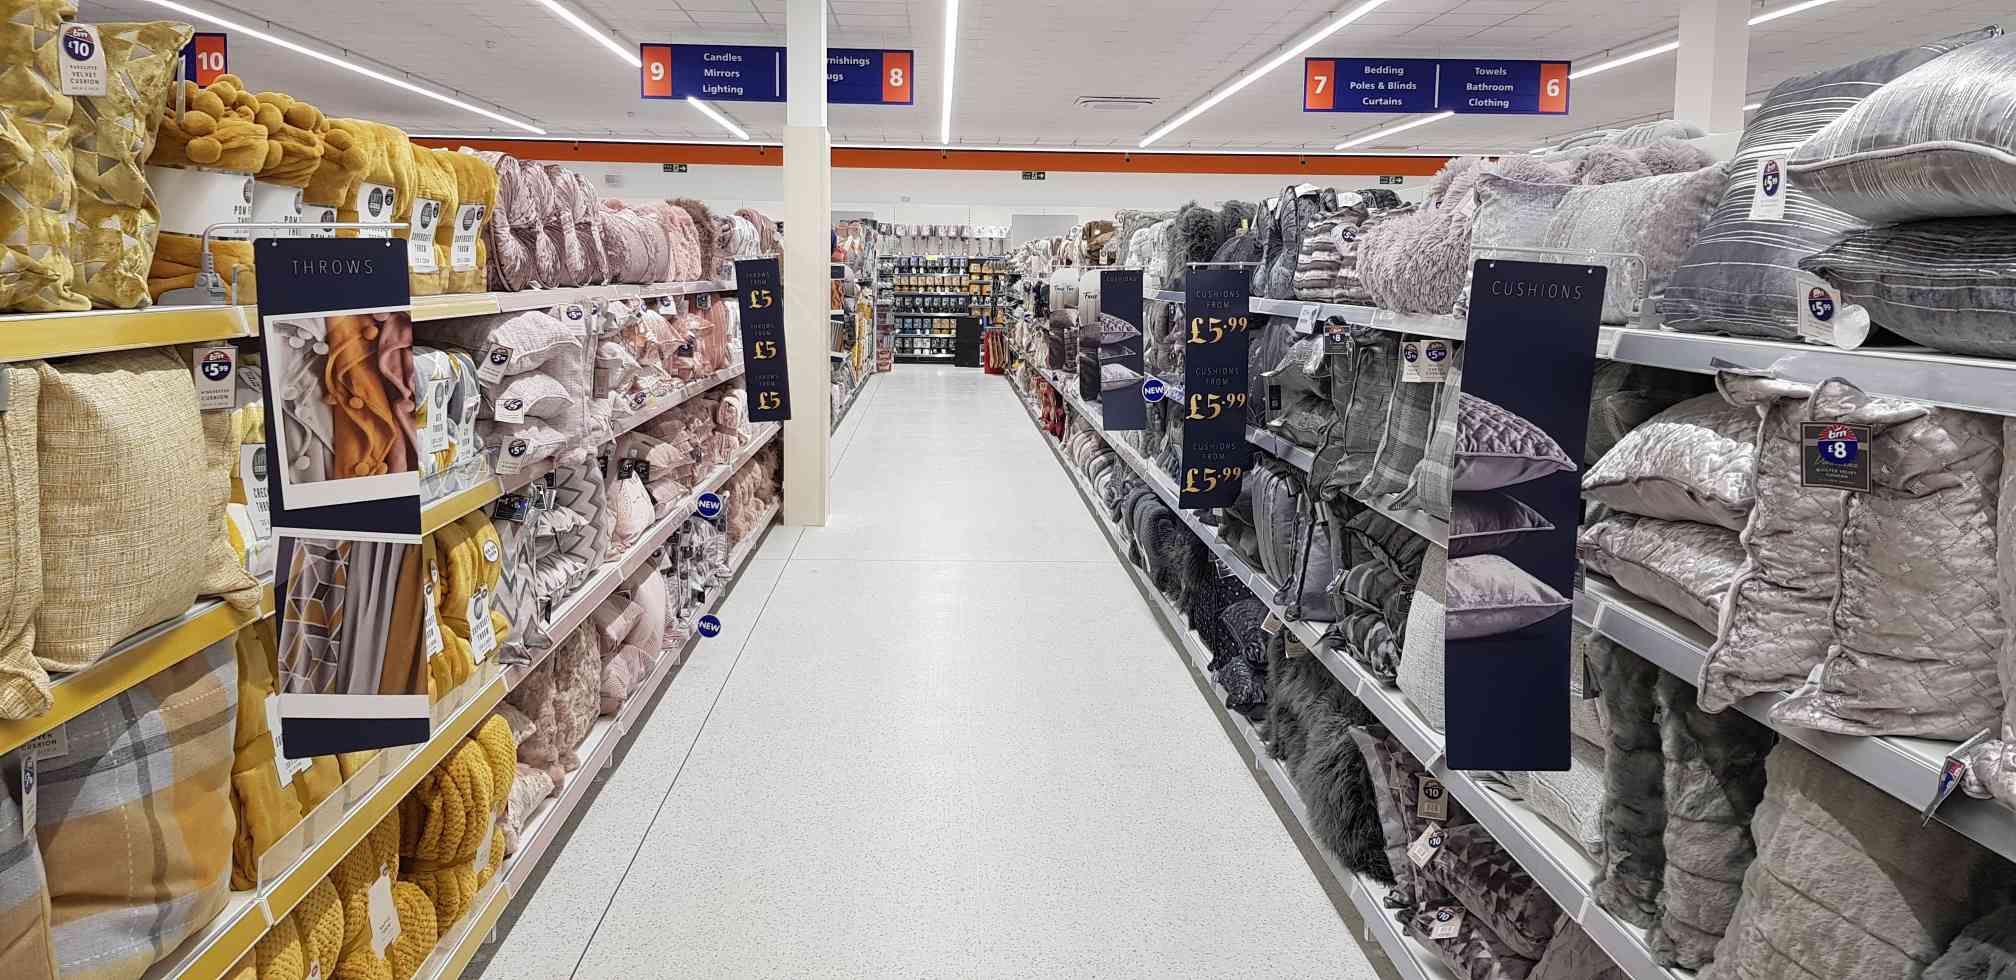 B&M's brand new store in Cowdenbeath stocks a stunning range of soft furnishings for the home, including cushions, covers, throws, blankets and more!